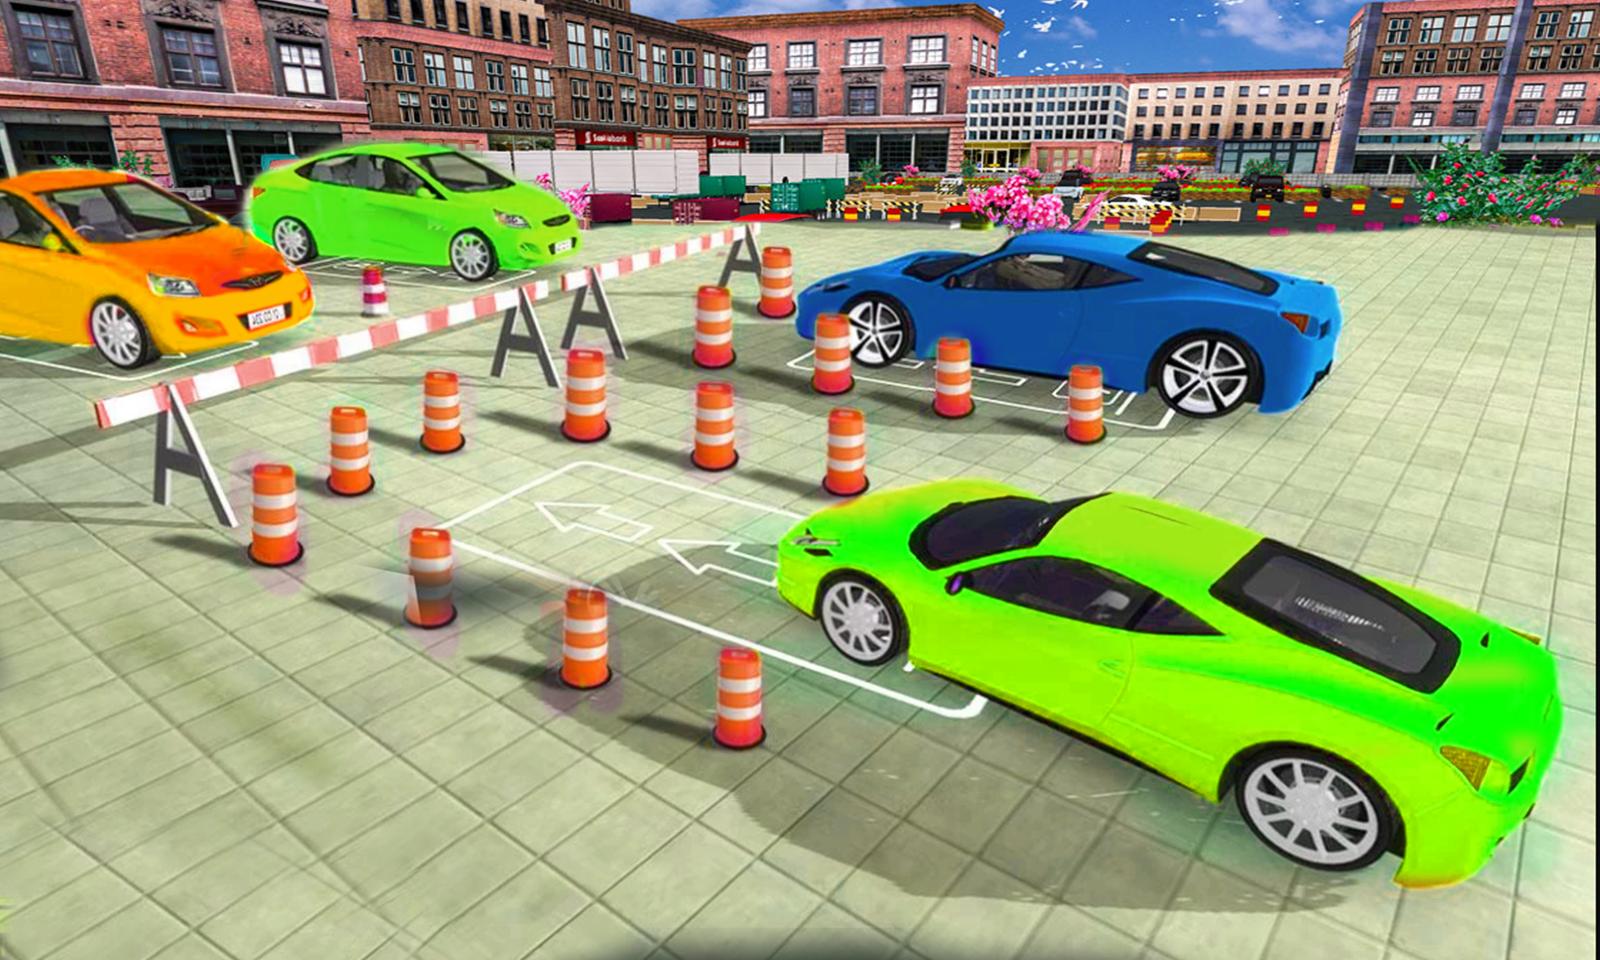 Ban cars from city. City car Racing. City car Driving 2017 Android. Extreme City Racing. Play City cars.